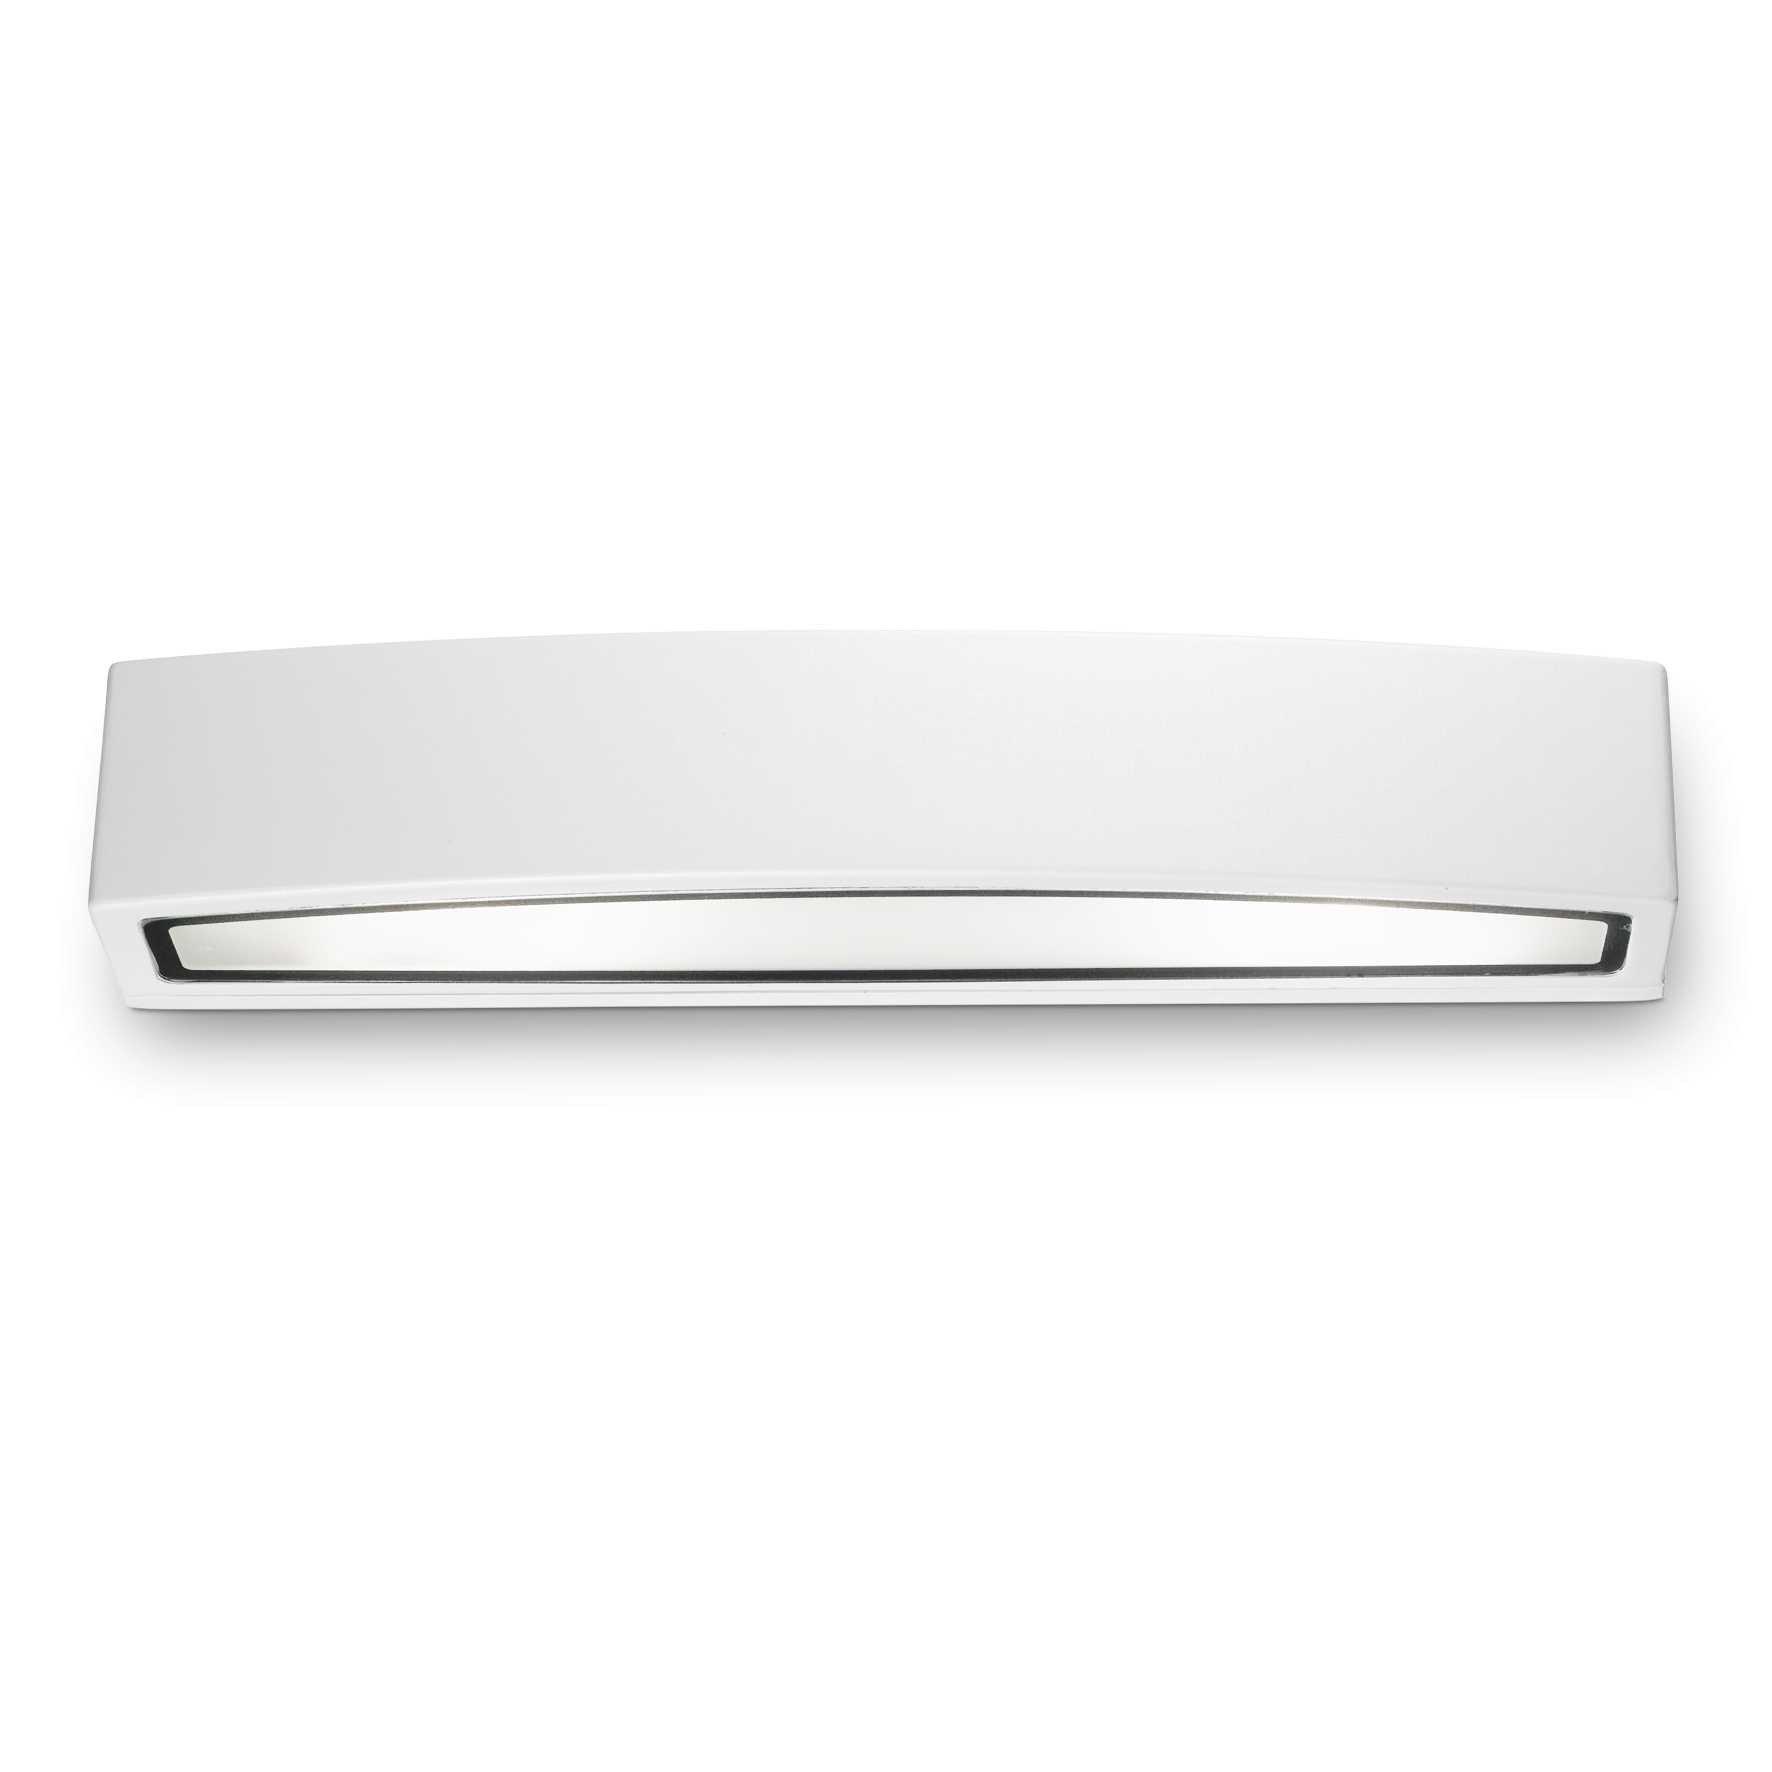 Andromeda 2 Light Outdoor Large Up Down Wall Light White Putty IP54 E27